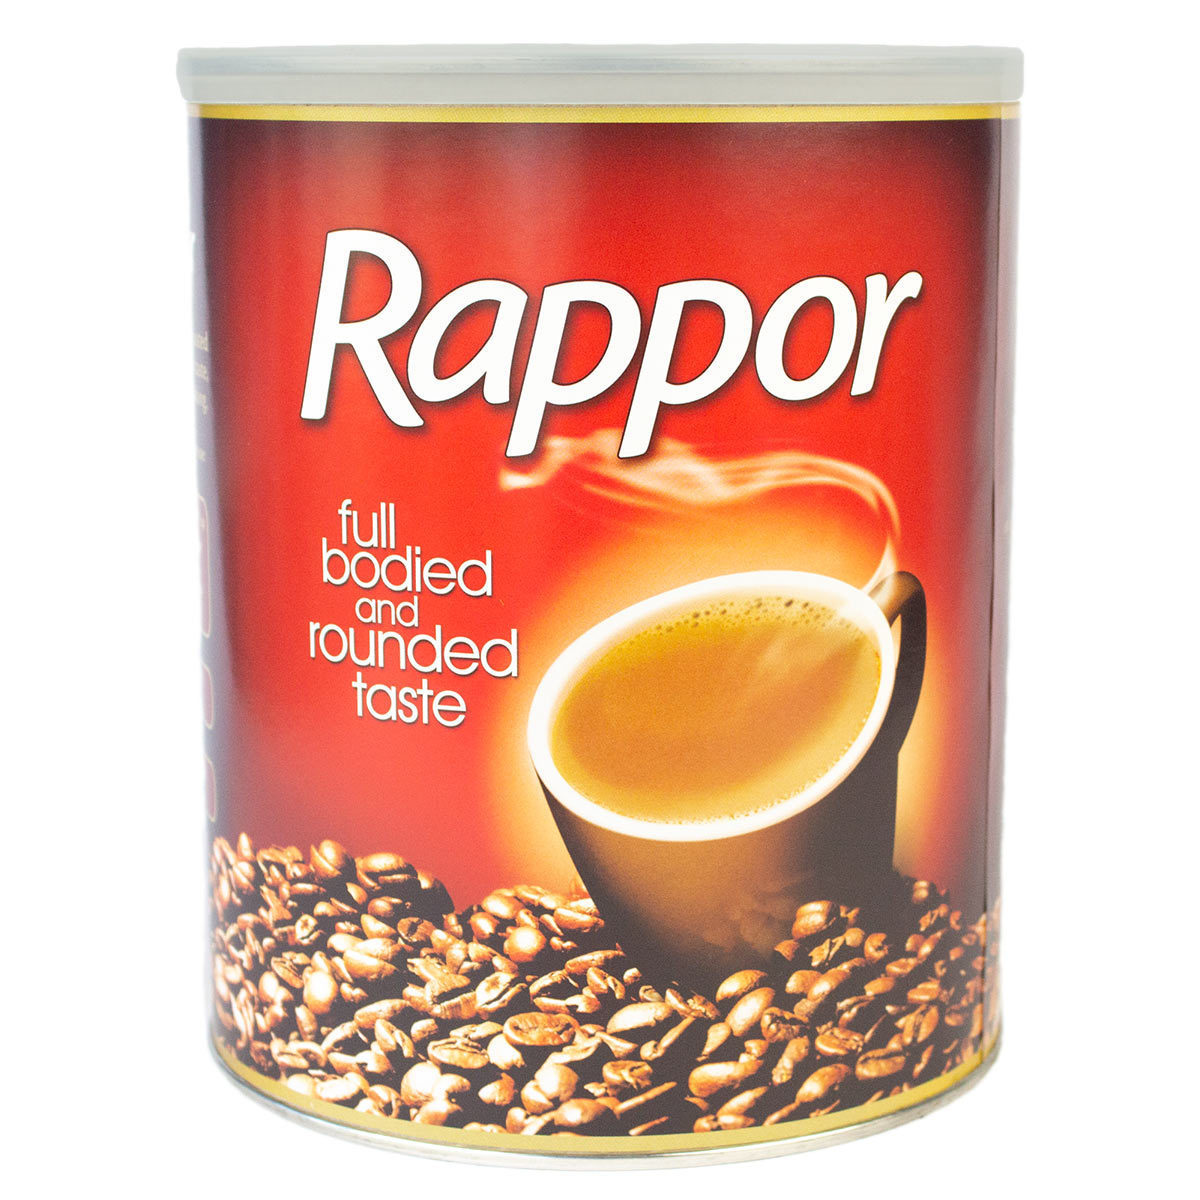 Red tub of Rappor coffee with coffee in mug picture